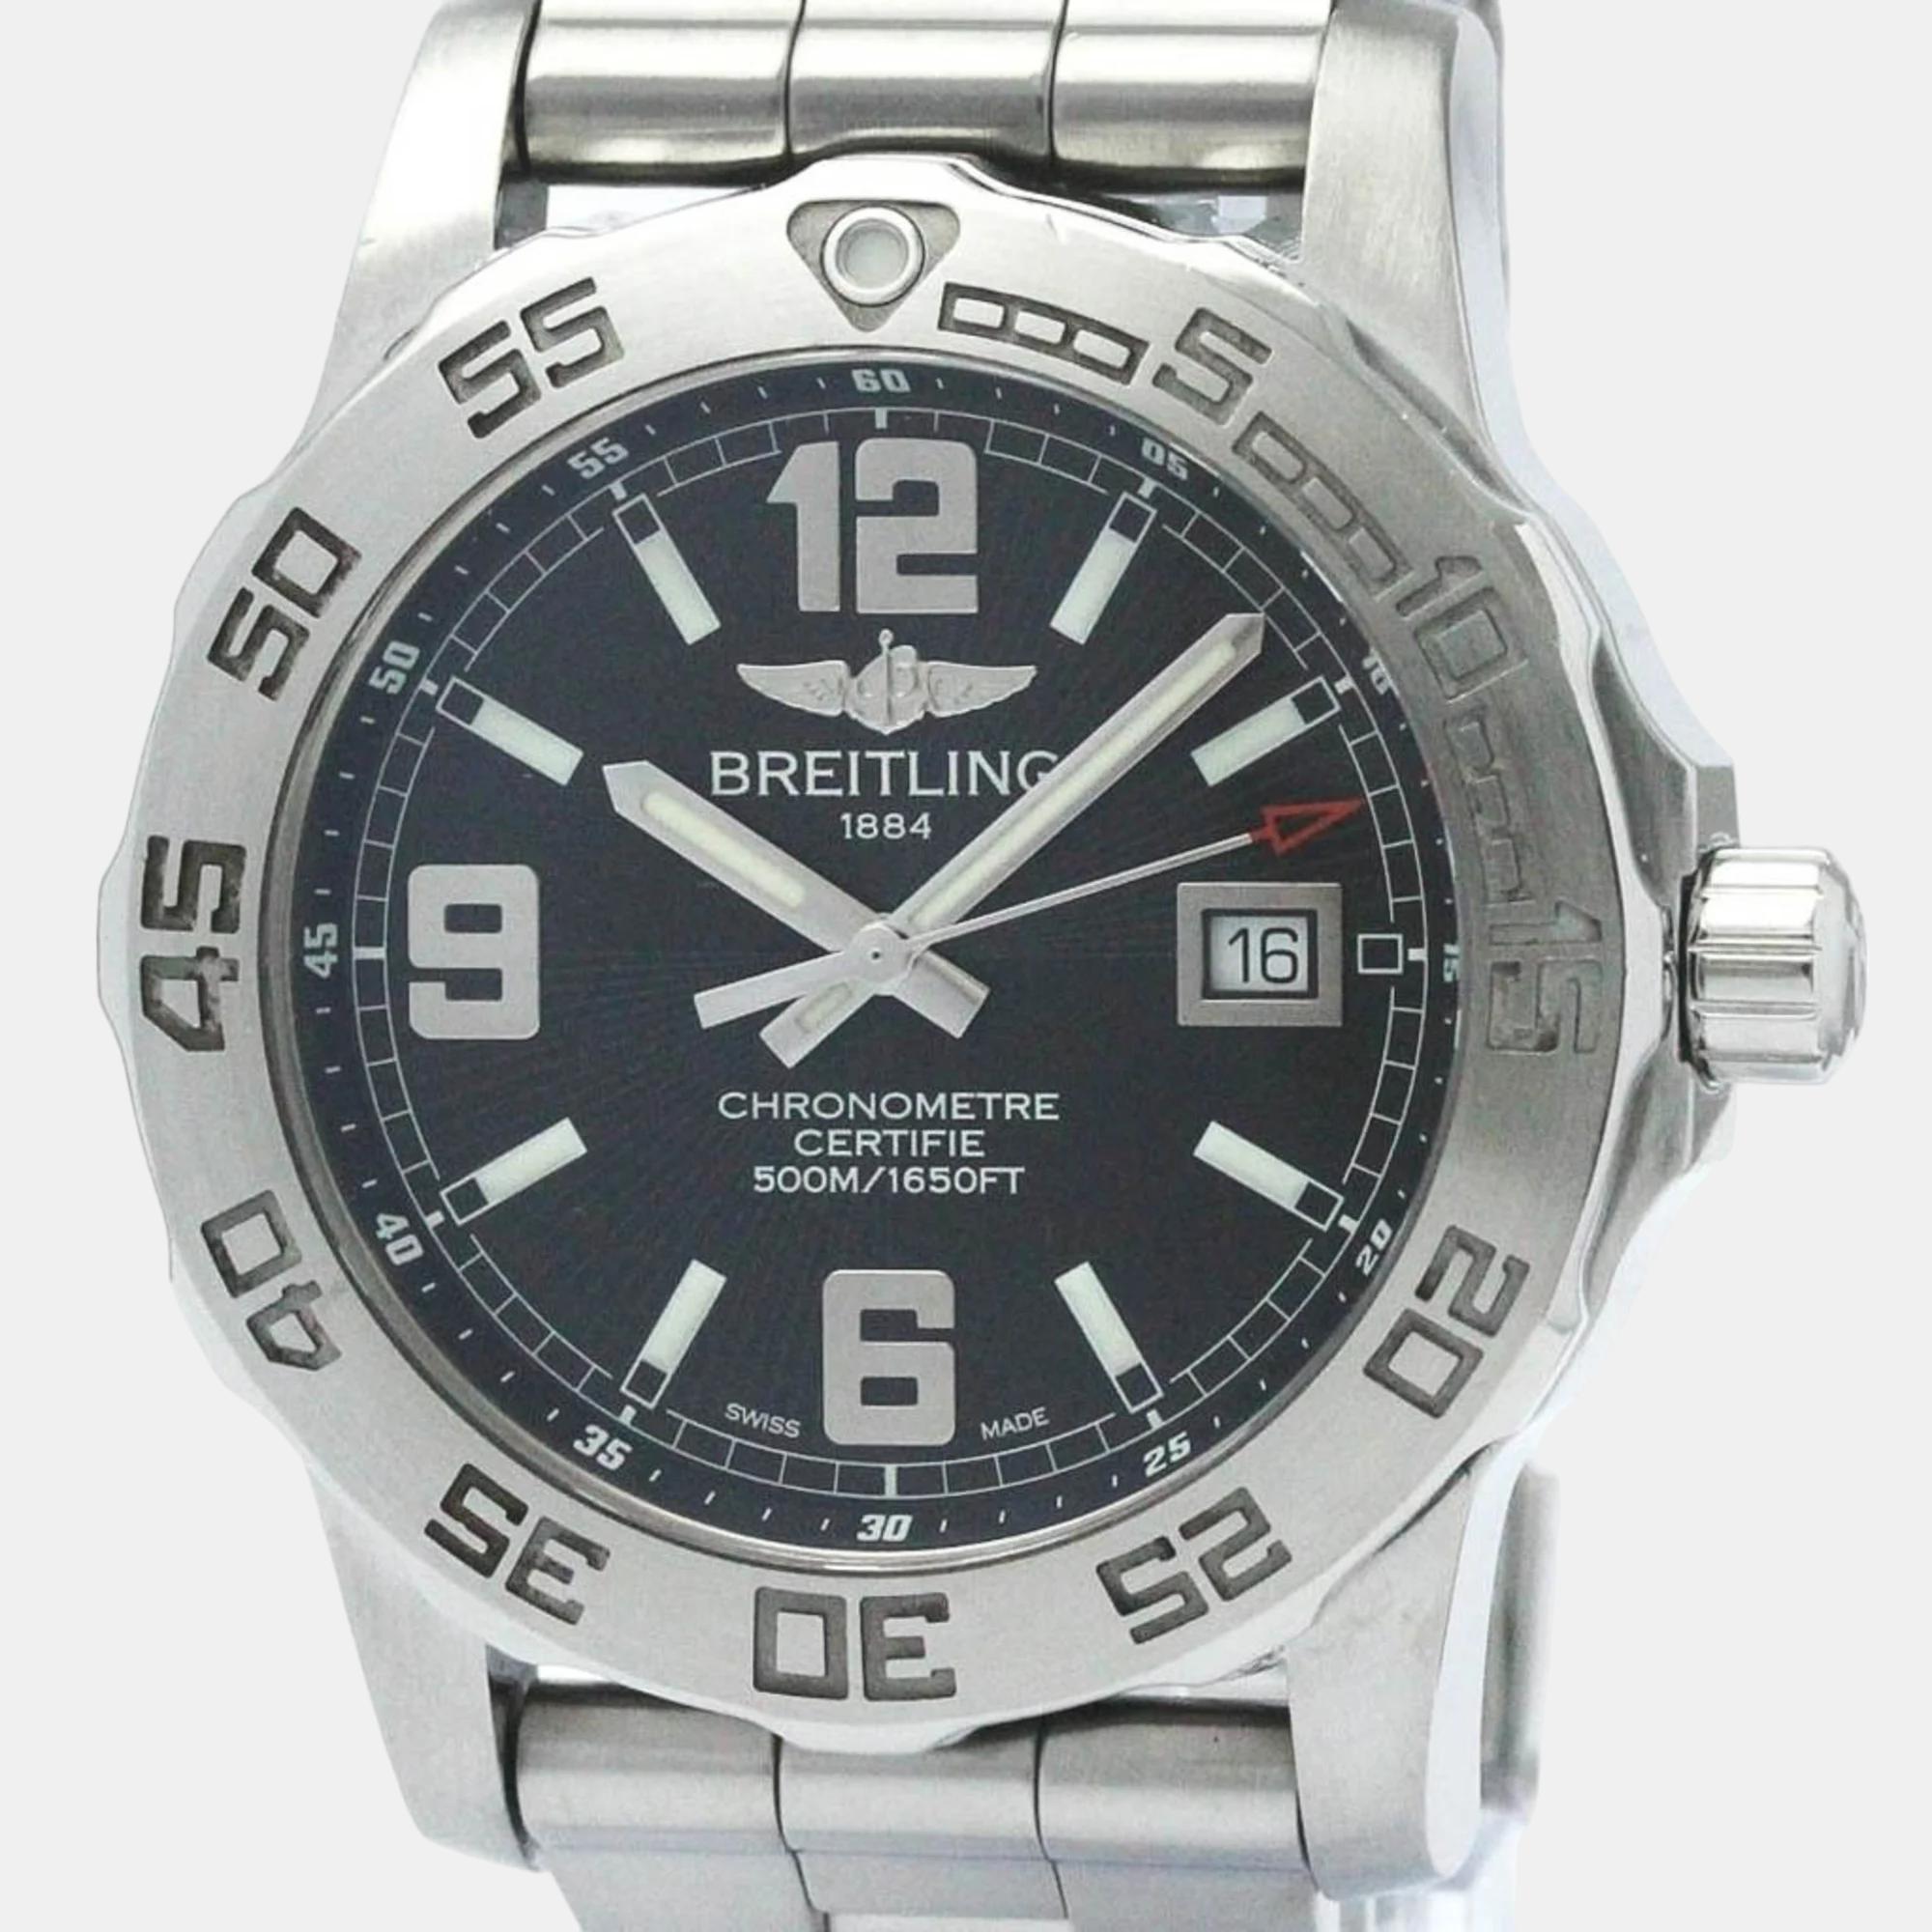 A classy silhouette made of high quality materials and packed with precision and luxury makes this authentic Breitling wristwatch the perfect choice for a sophisticated finish to any look. It is a grand creation to elevate the everyday experience.